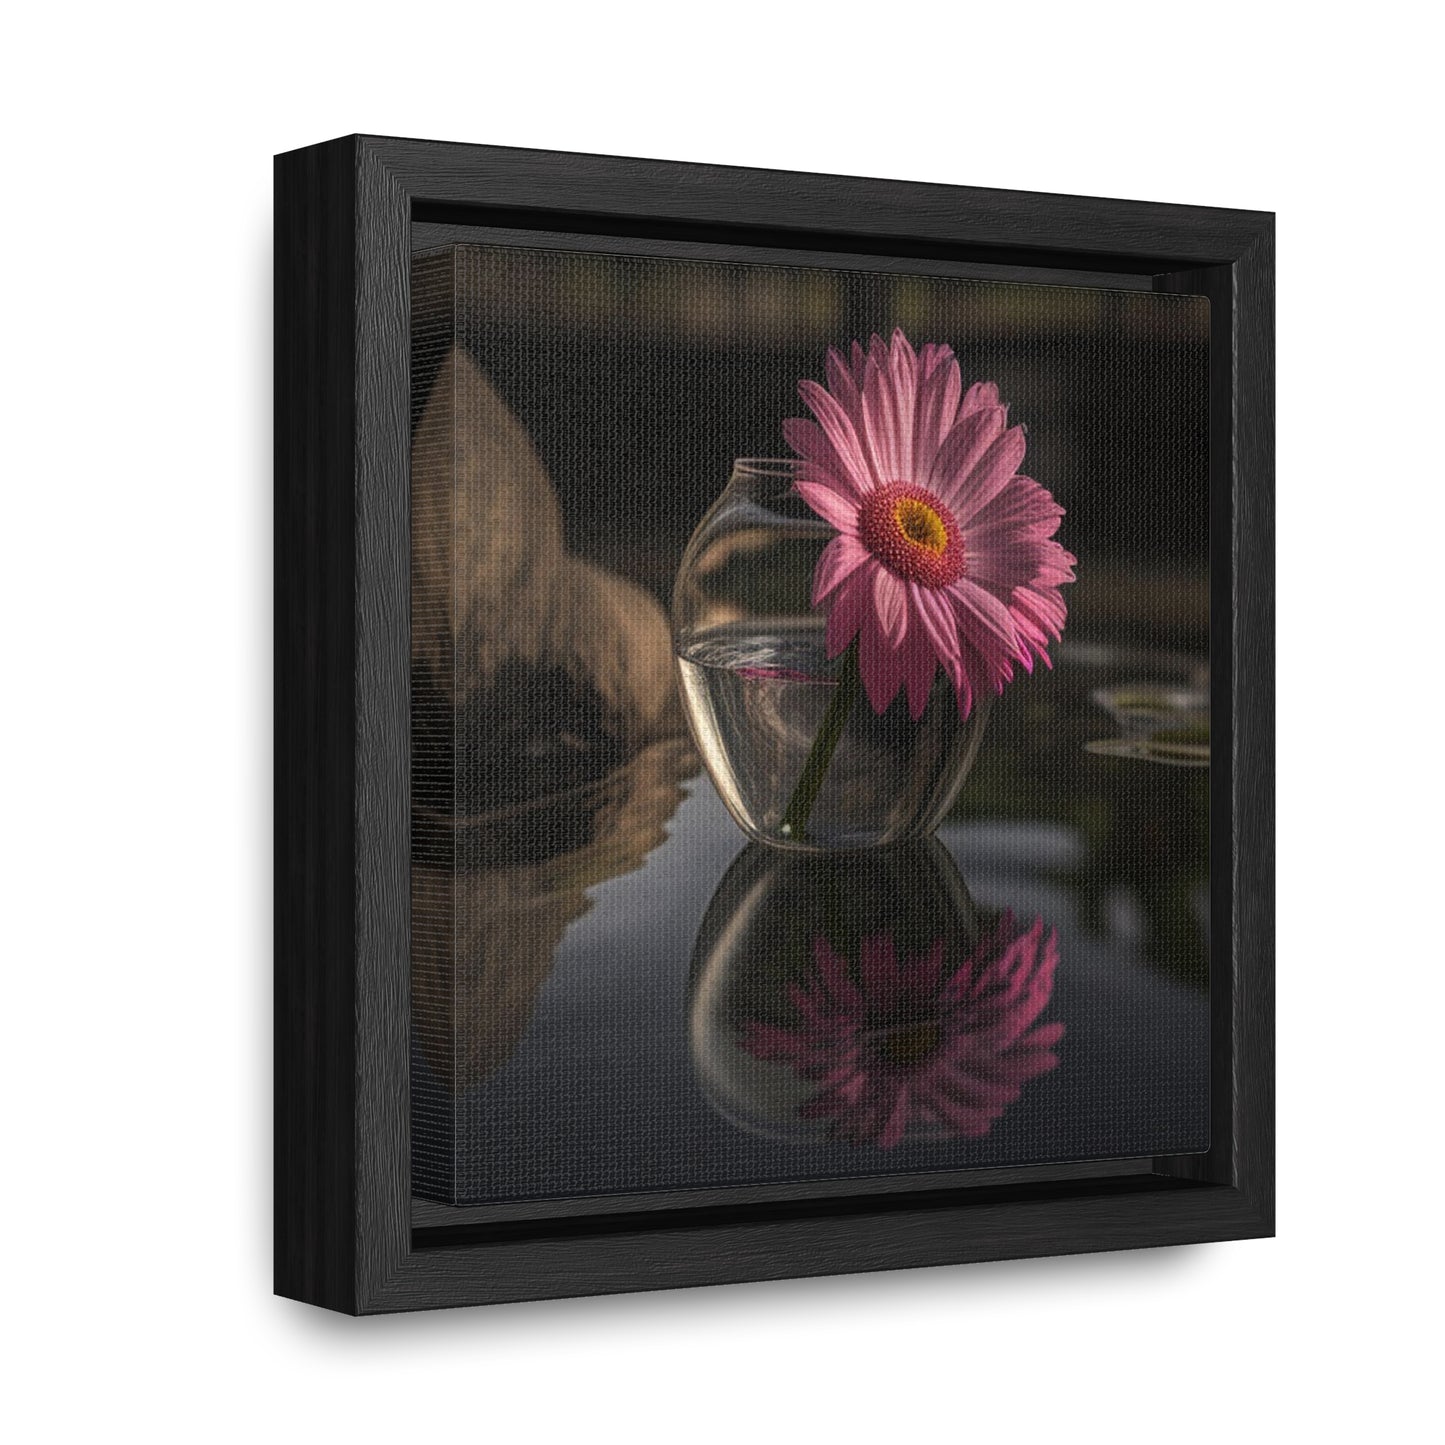 Gallery Canvas Wraps, Square Frame Pink Daisy 2